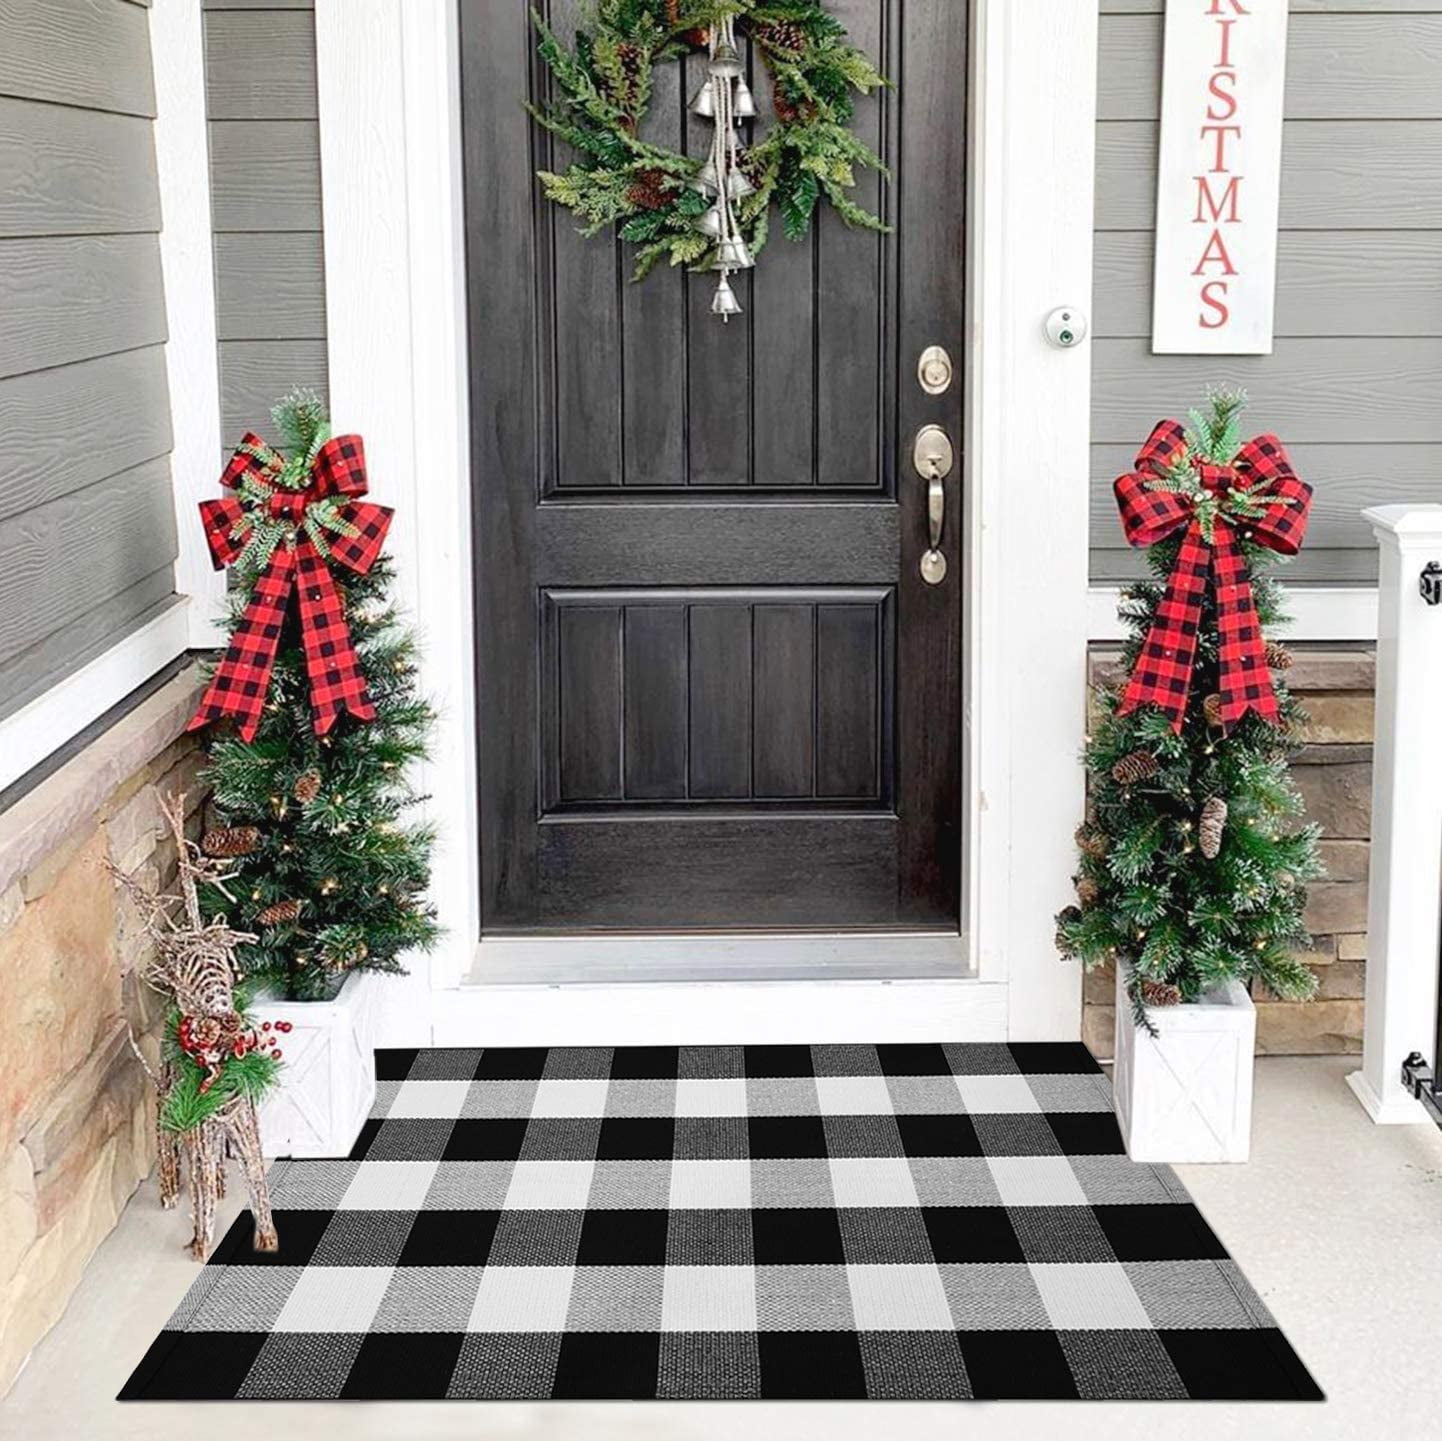 KIMODE Buffalo Plaid Outdoor Indoor Rug Doormat 3' x 5', Cotton Woven  Outdoor Door Mat Washable Farmhouse Checkered Porch Rugs for Front Kitchen